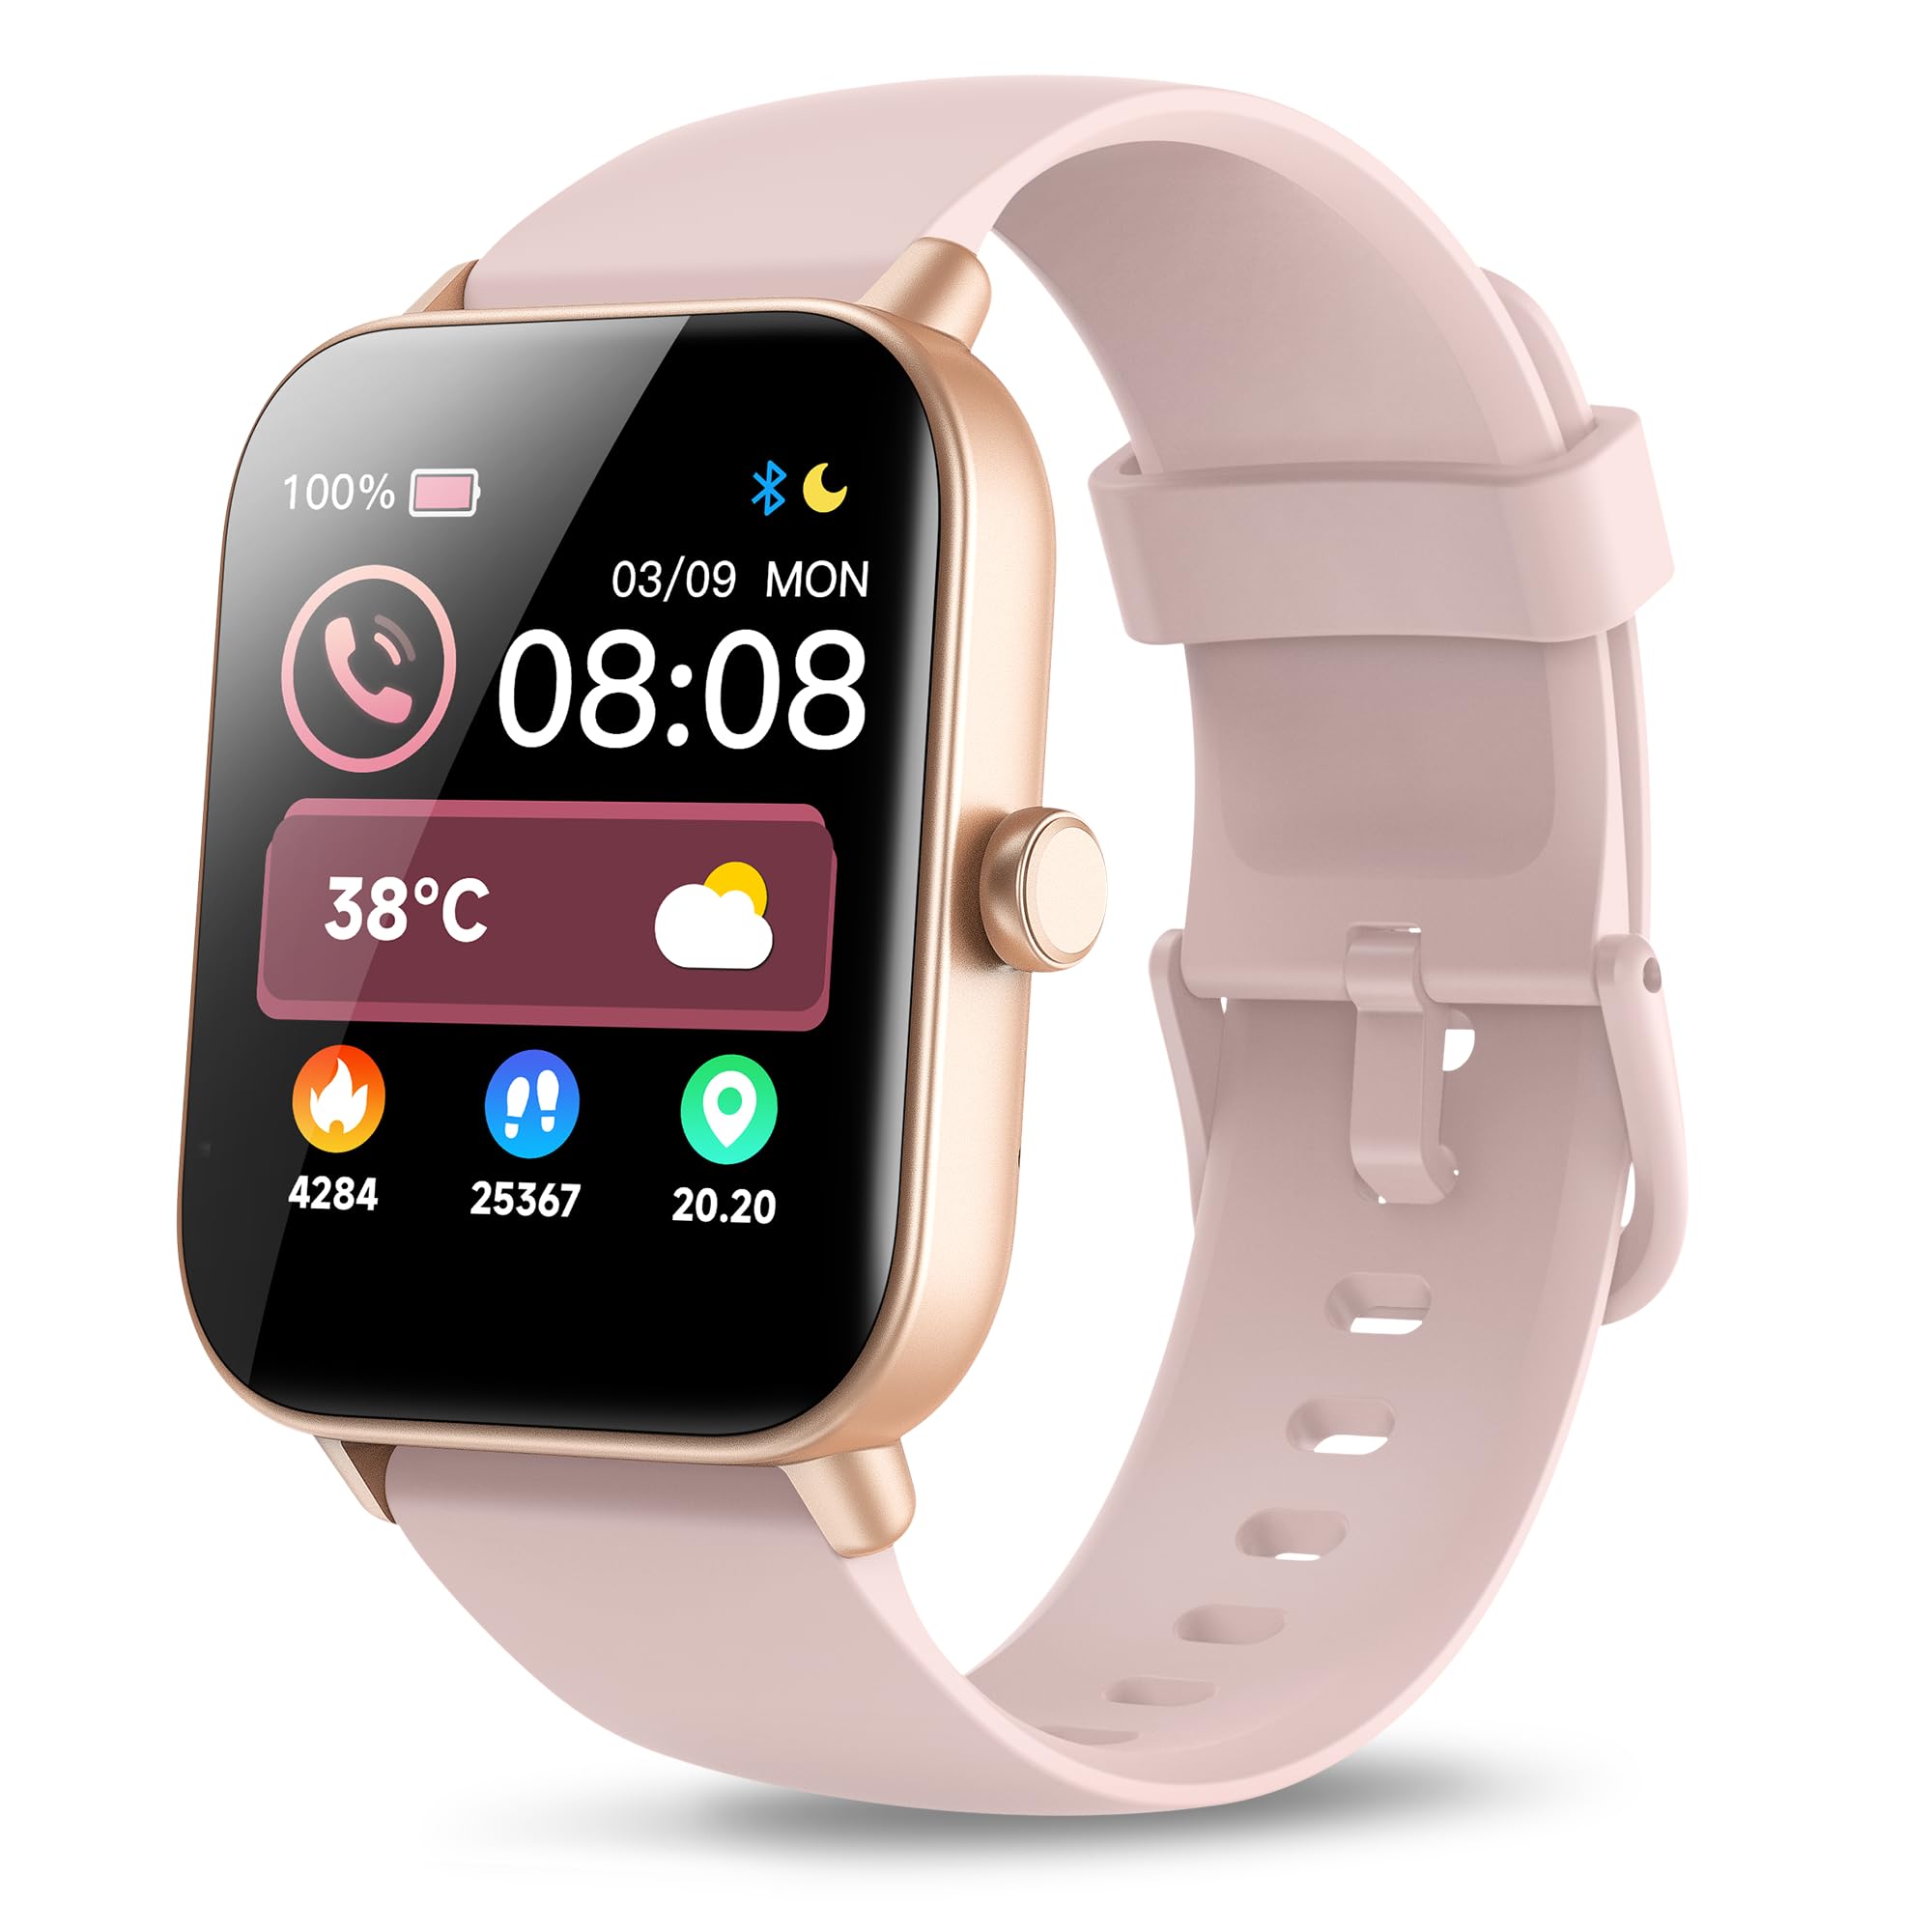 Smart Watch for Women (Alexa Built-in & Bluetooth Call), 1.8" Smartwatch with SpO2/Heart Rate/Sleep/Stress Monitor, Calorie/Step/Distance Counter, 100+ Sport Modes, IP68 Fitness Watch for Android iOS